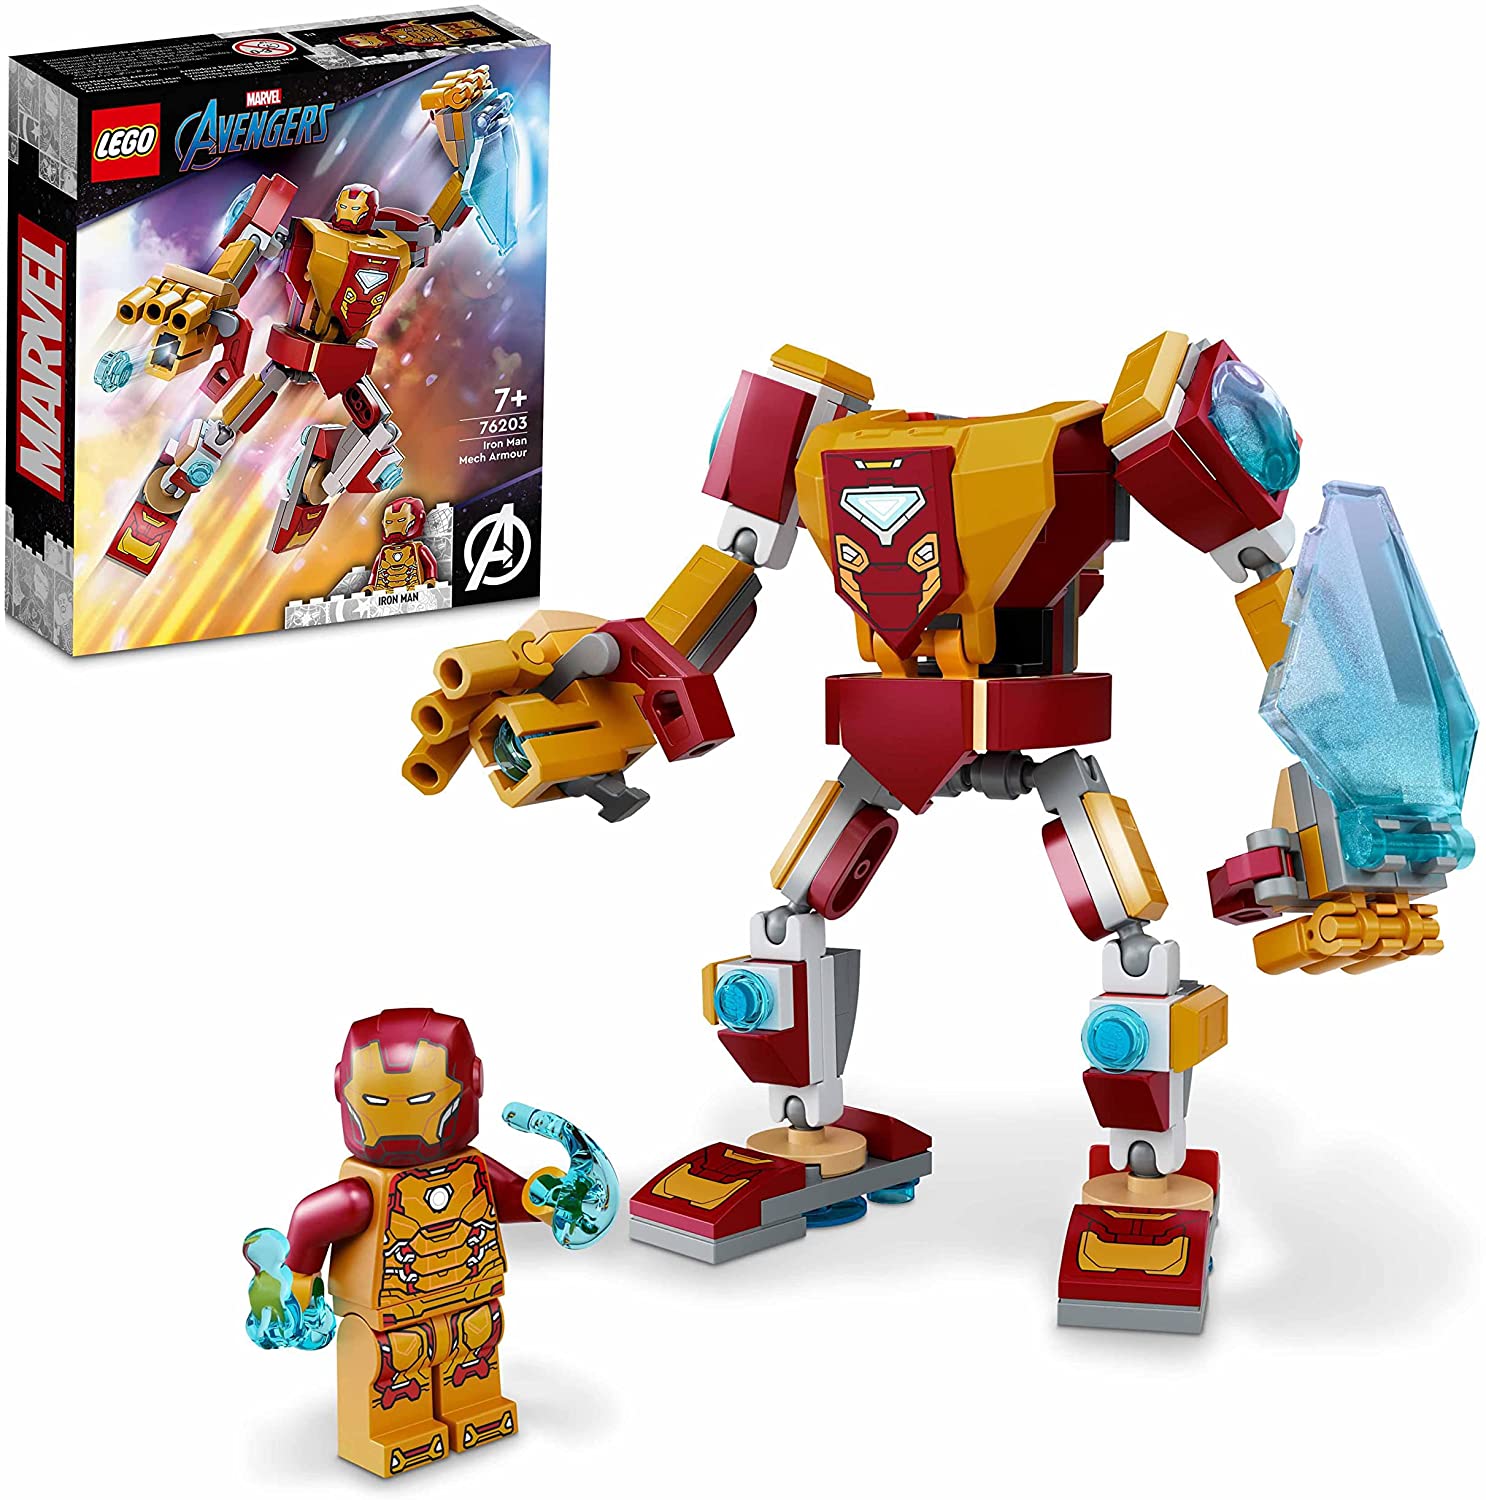 LEGO 76203 Marvel Iron Man Mech Collectable Figure, Superhero Toy for Children from 7 Years, Avengers Action Figure